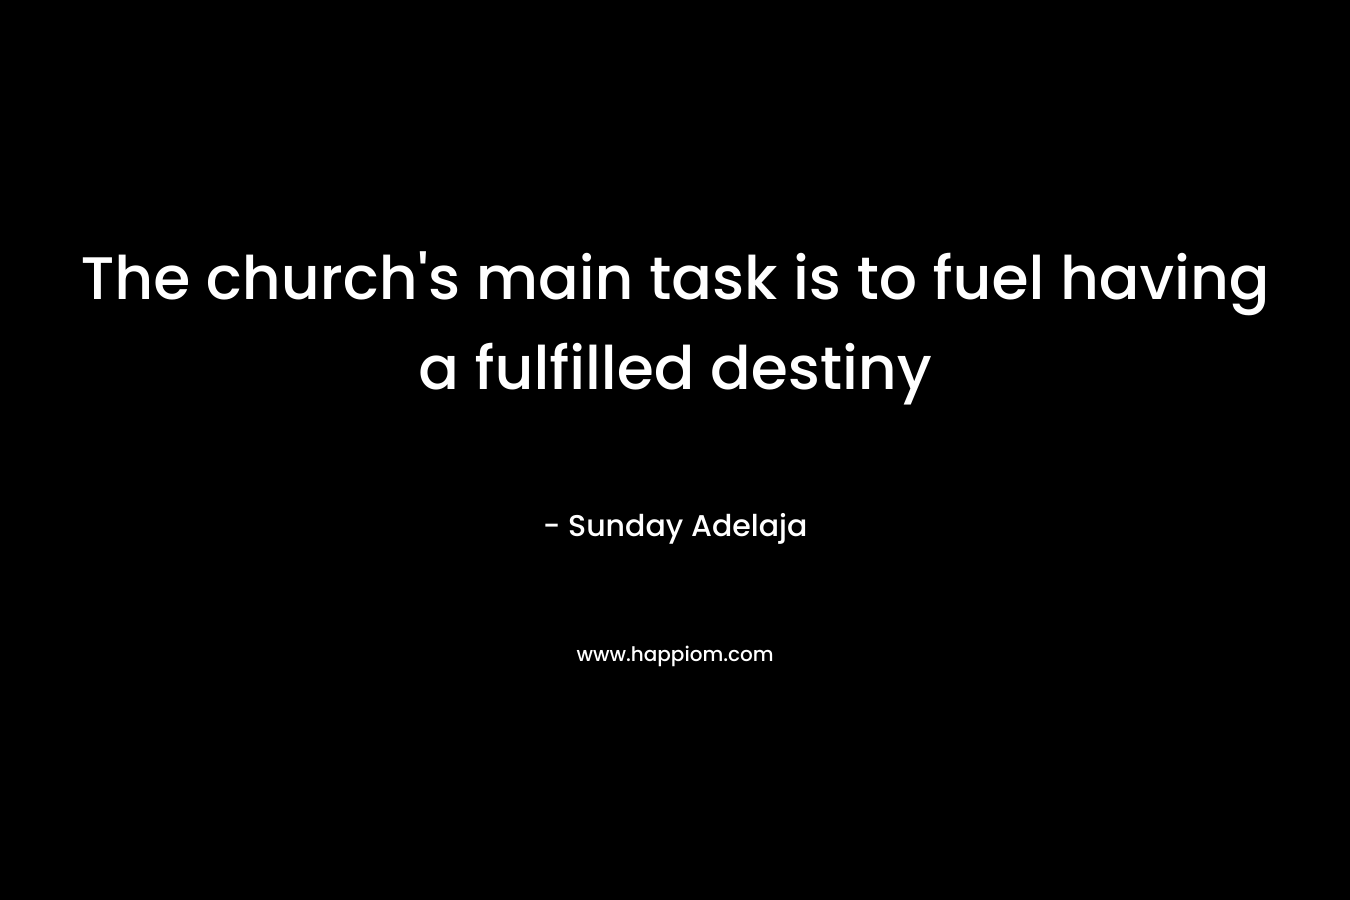 The church's main task is to fuel having a fulfilled destiny